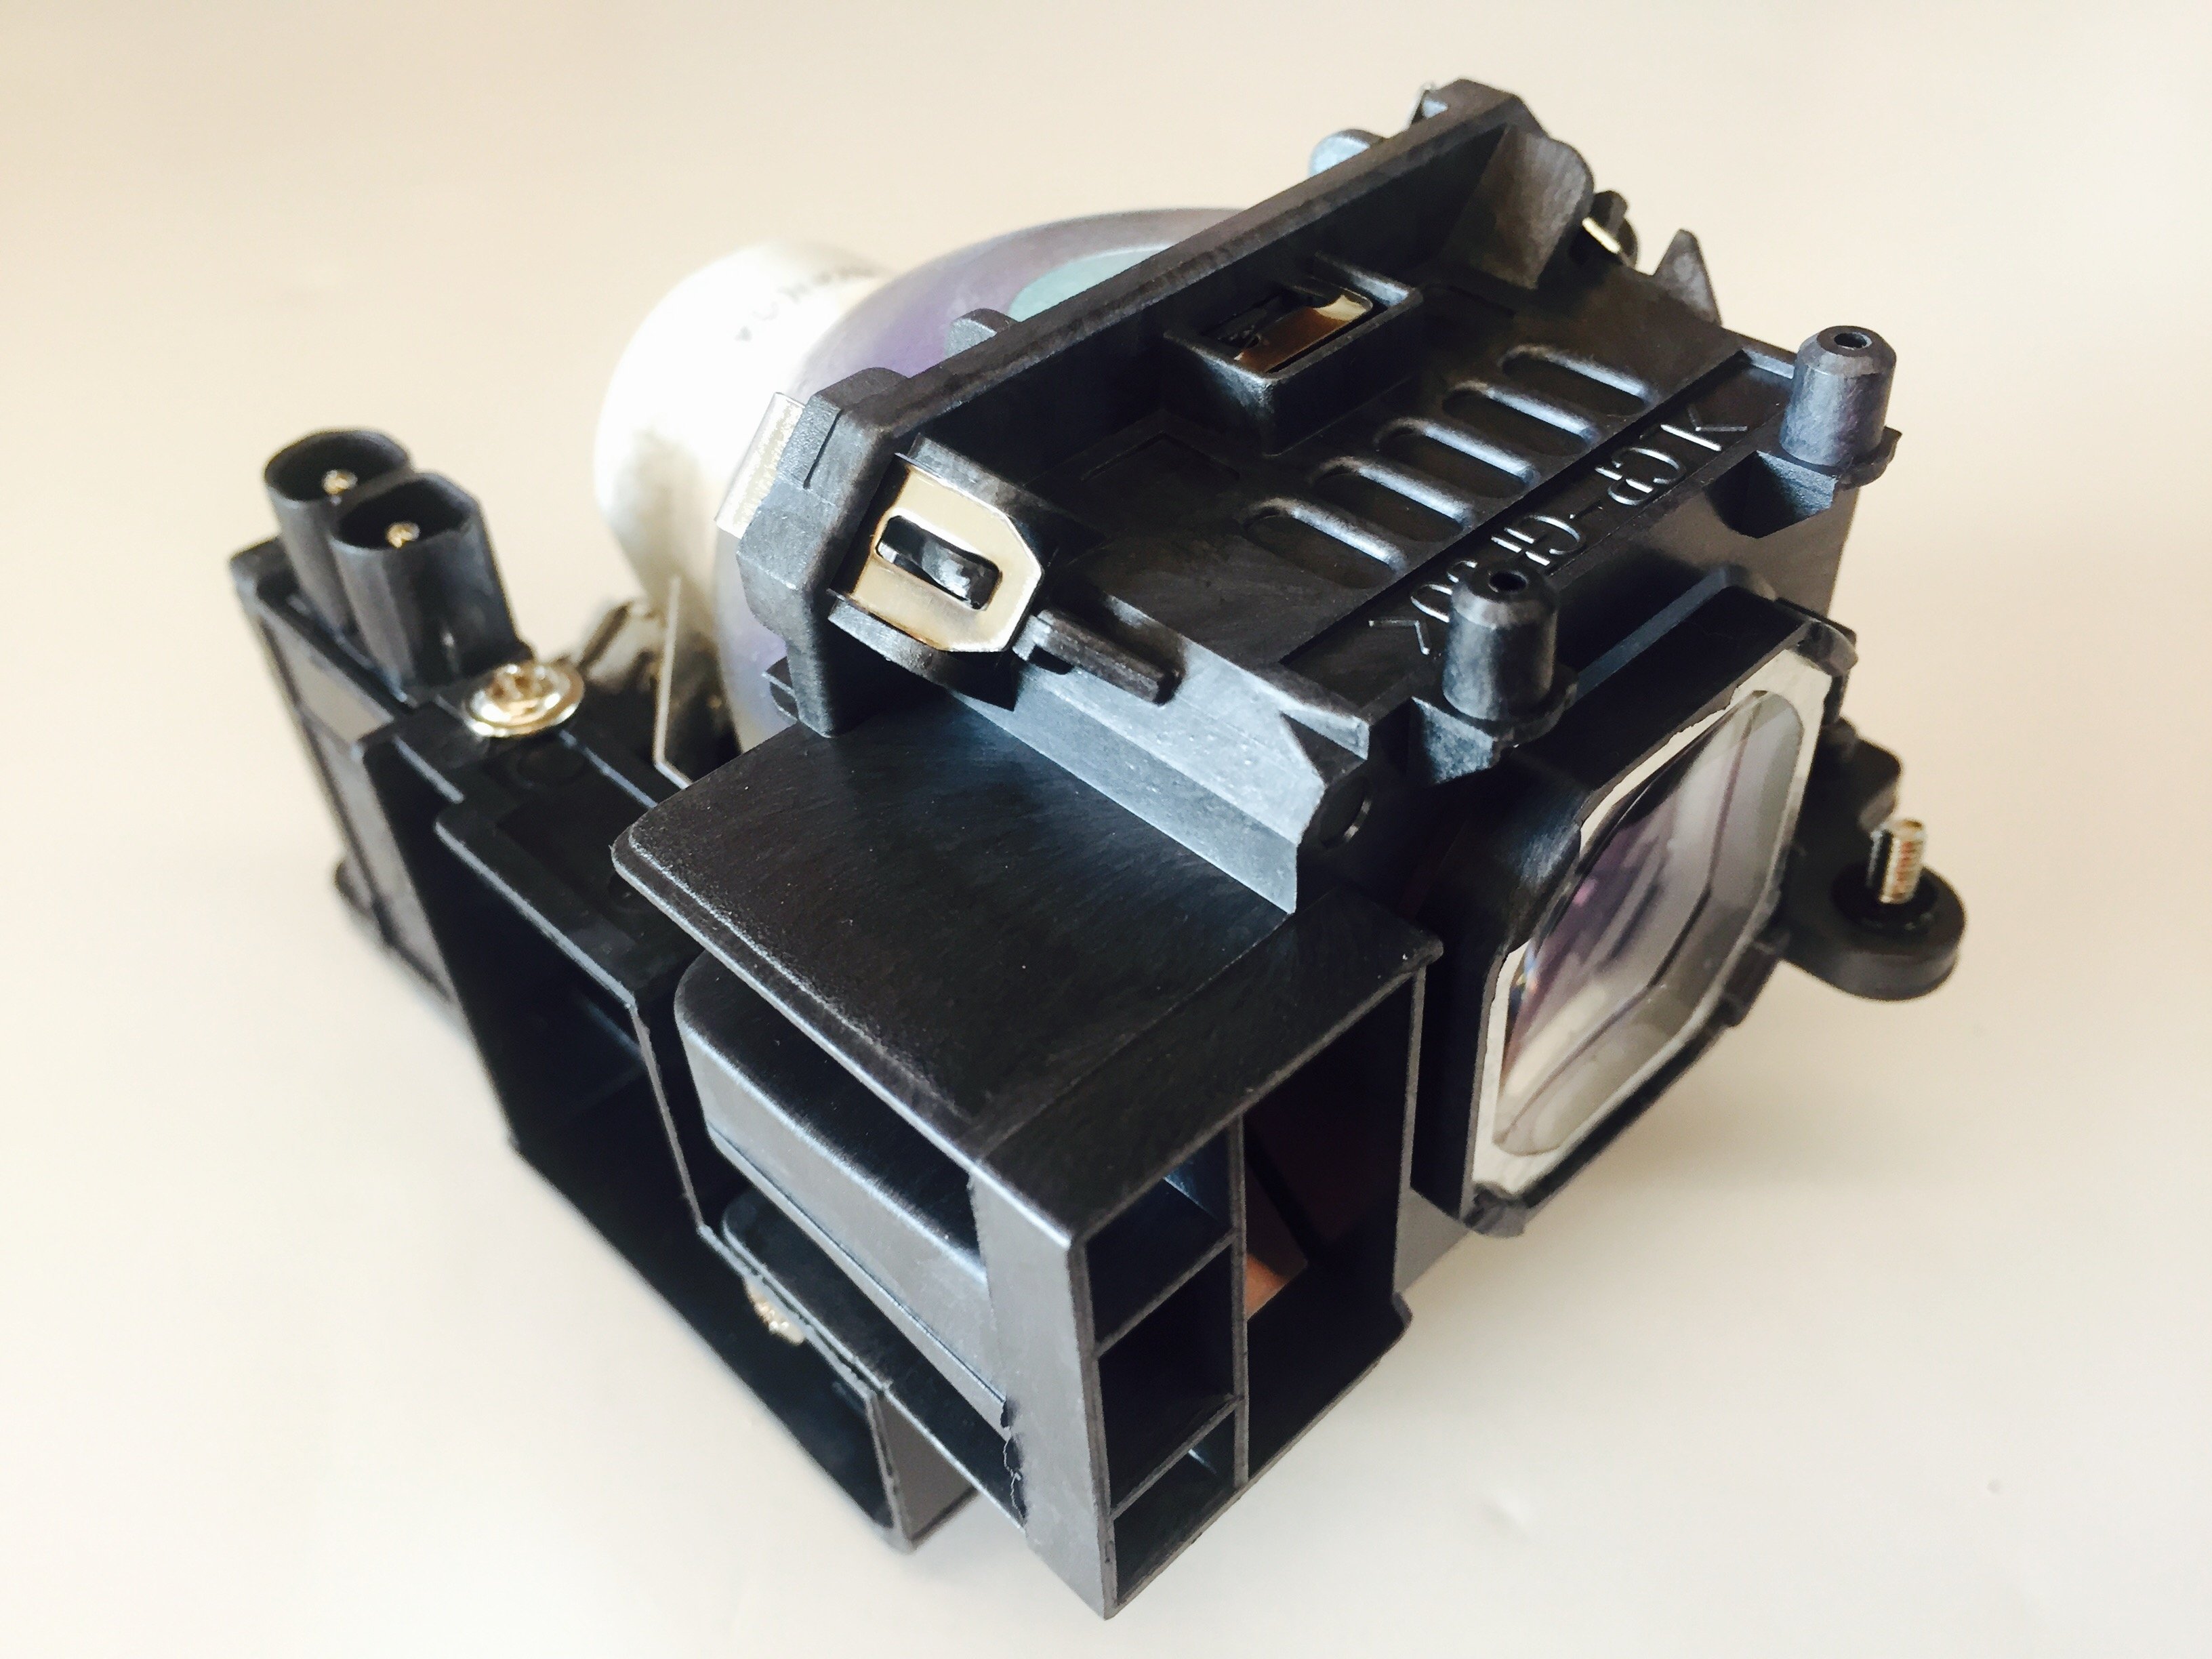 Original Ushio Replacement Lamp & Housing for the NEC NP-ME331W Projector - image 1 of 6